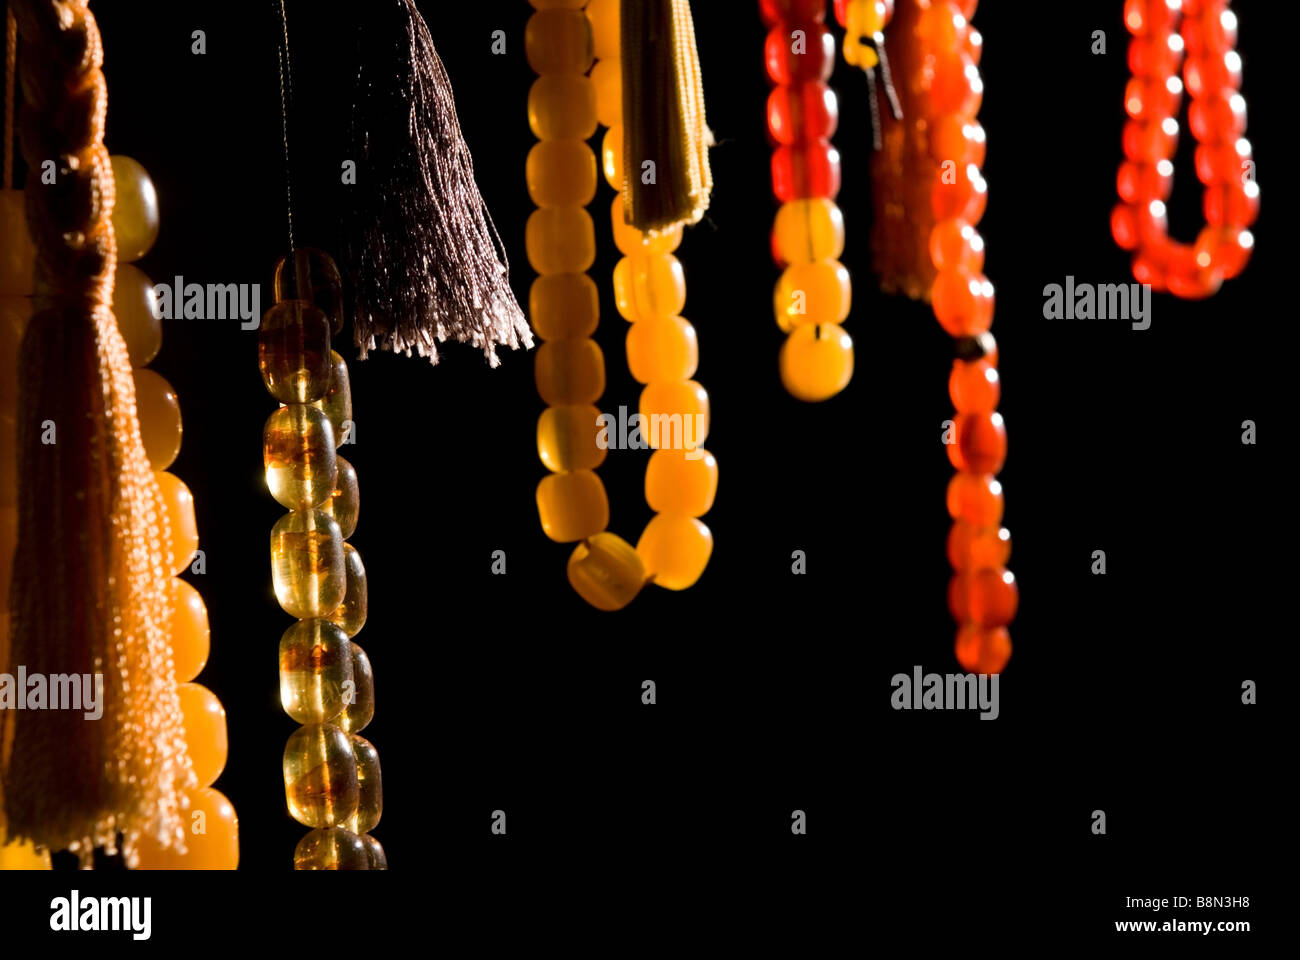 Set of Greek kompoloi or komboloi made of amber. Worry beads resemble prayer bead but without any religious significance Stock Photo